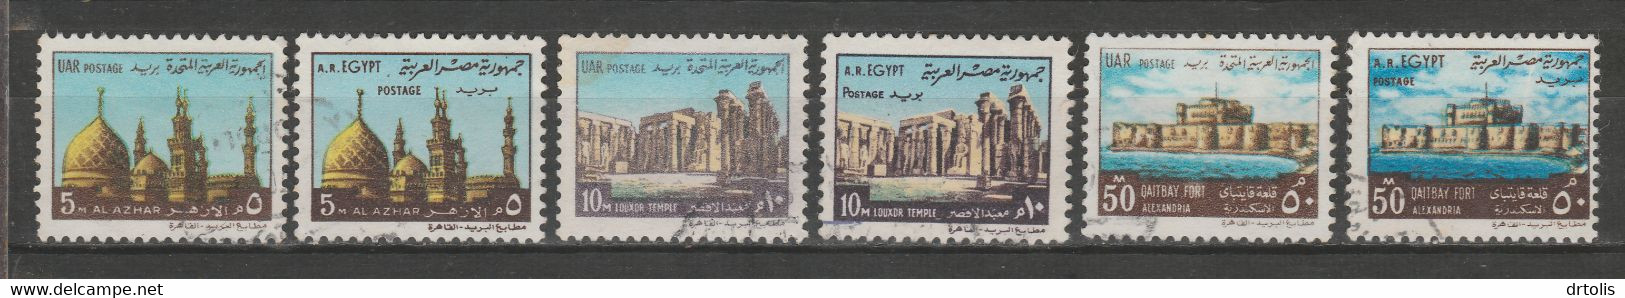 EGYPT / 1970 & 1972 ISSUES / VF USED - Oblitérés